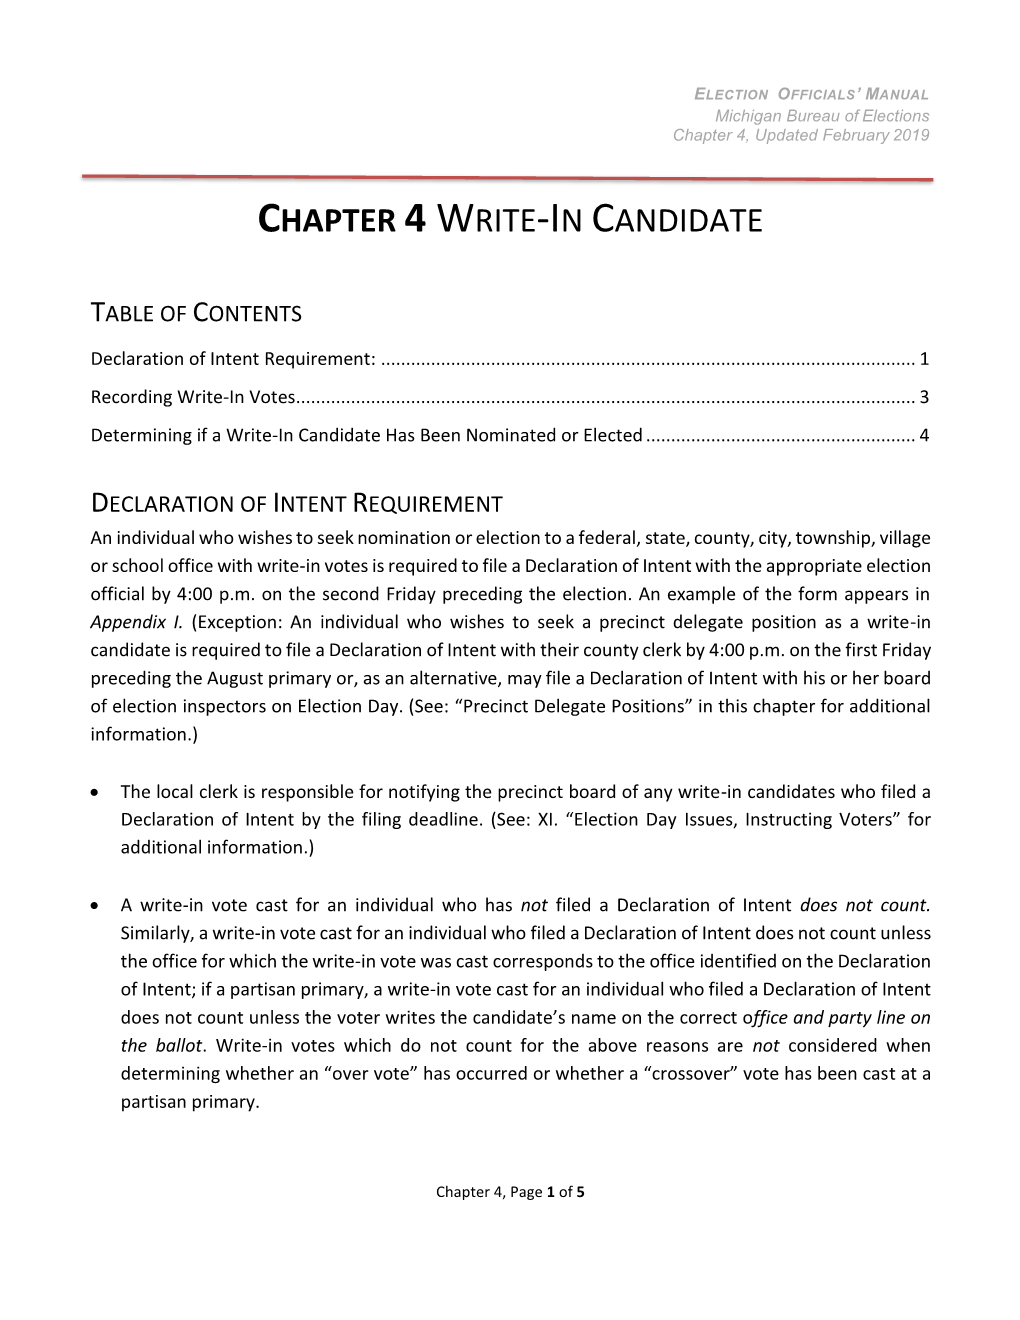 Chapter 4 Write-In Candidate